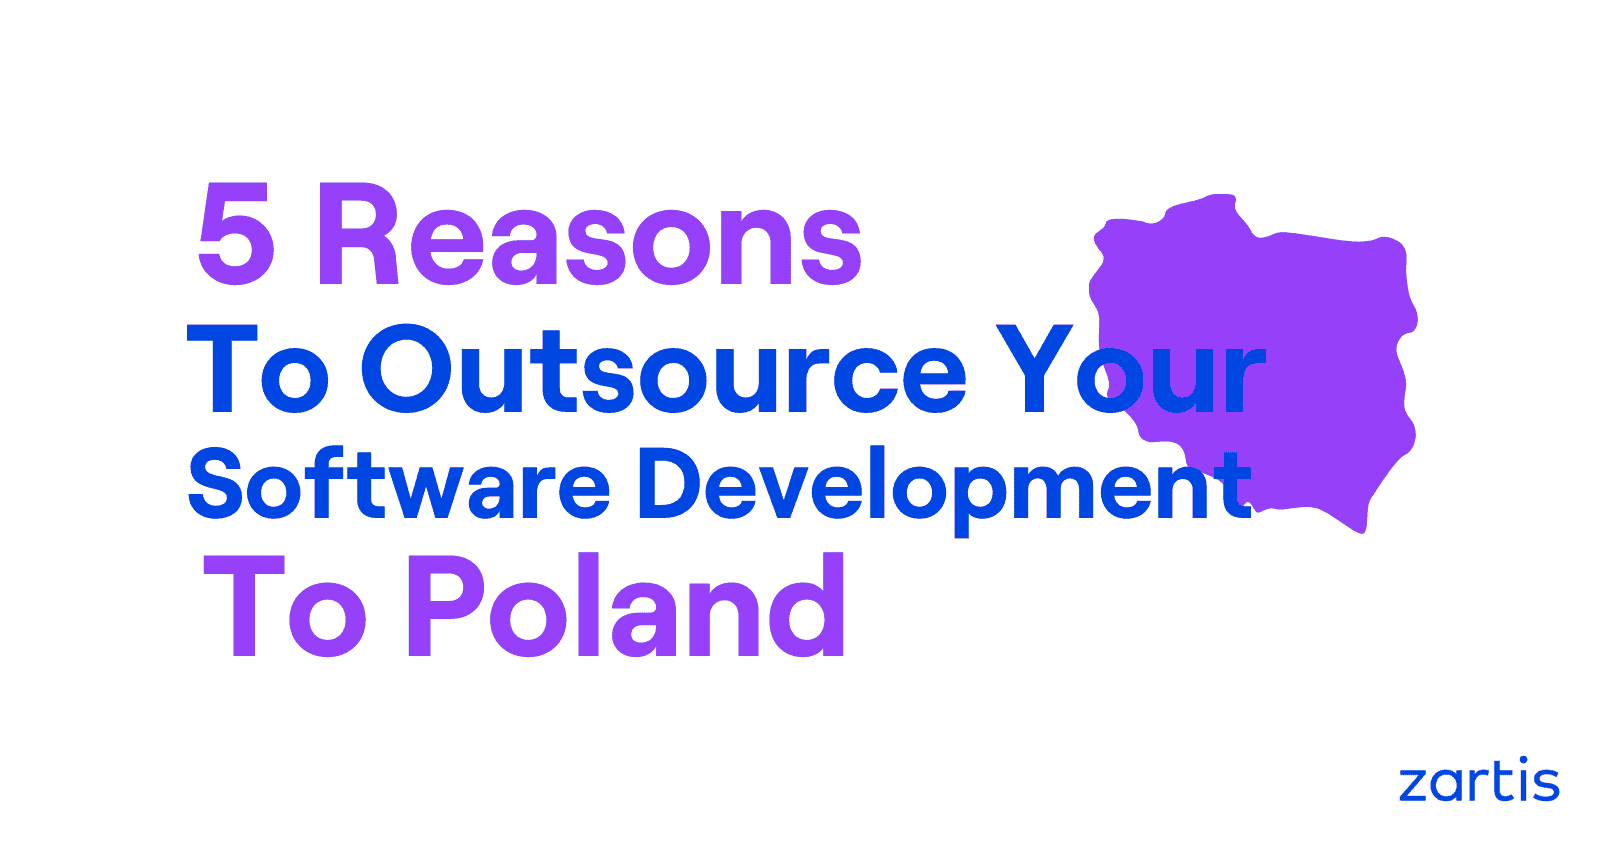 5 reasons why you should outsource software development to Poland